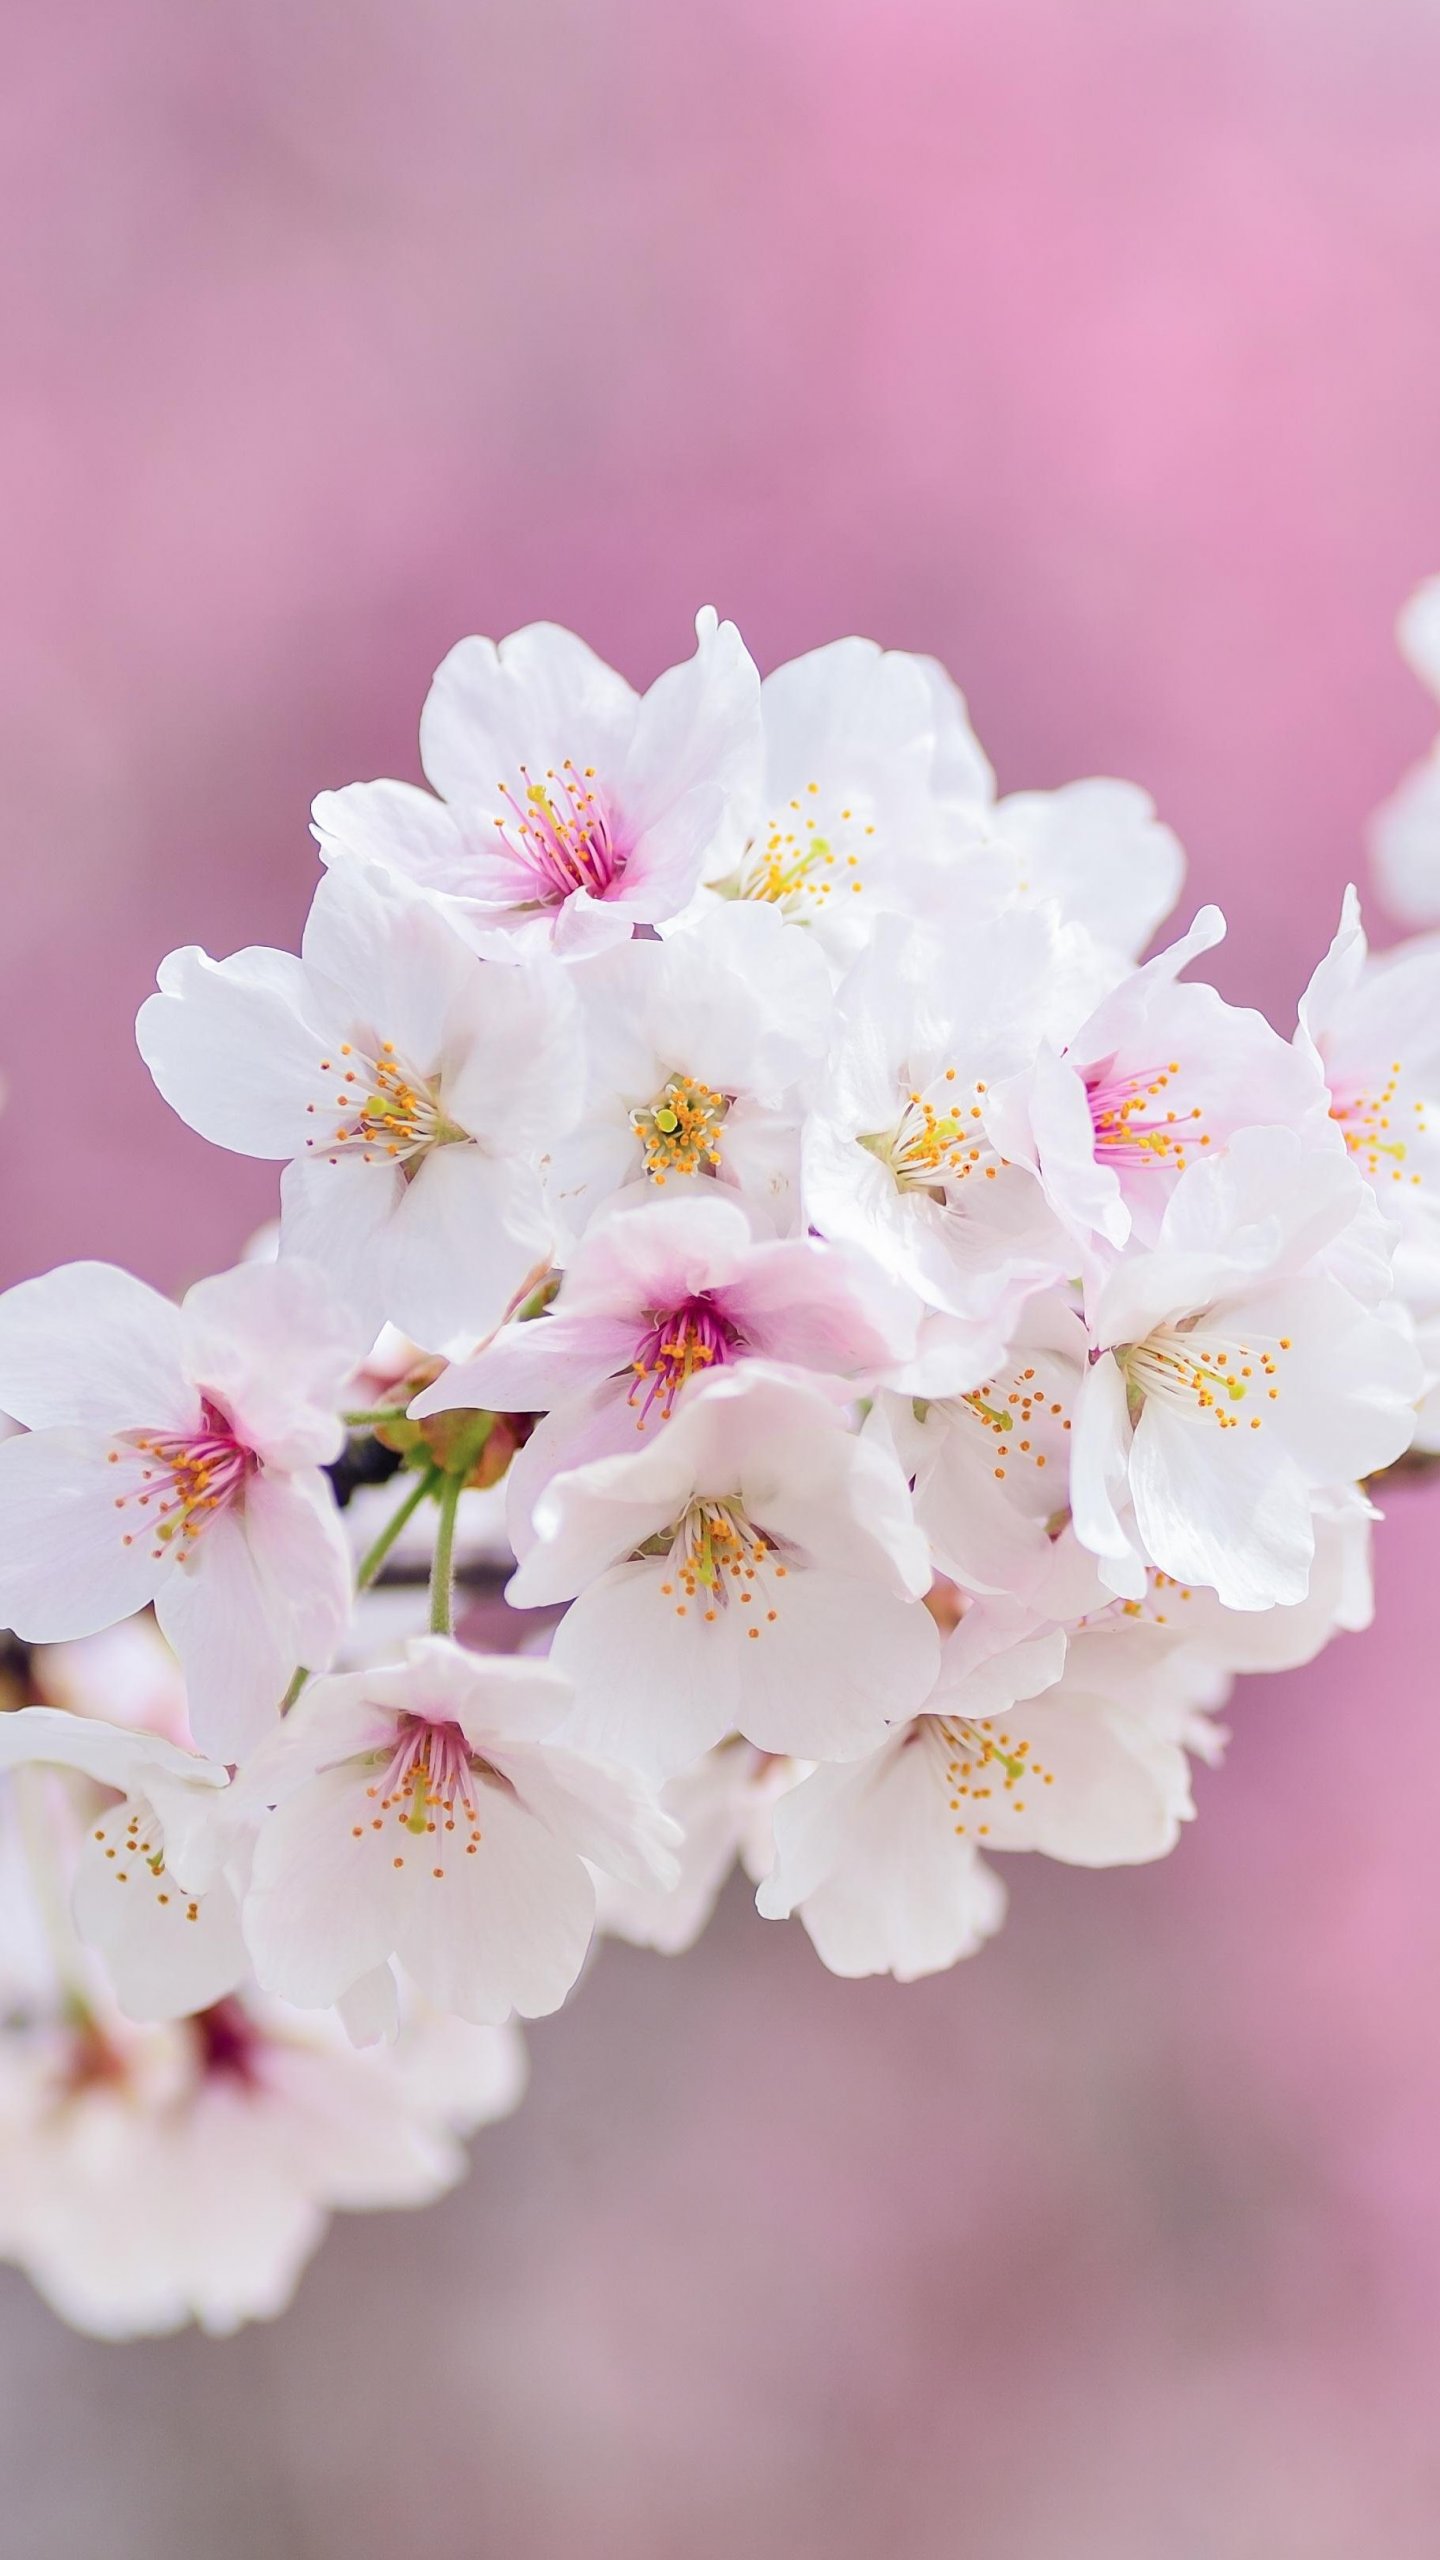 Stunning spring wallpapers for iPhone in 2023 Free download  iGeeksBlog